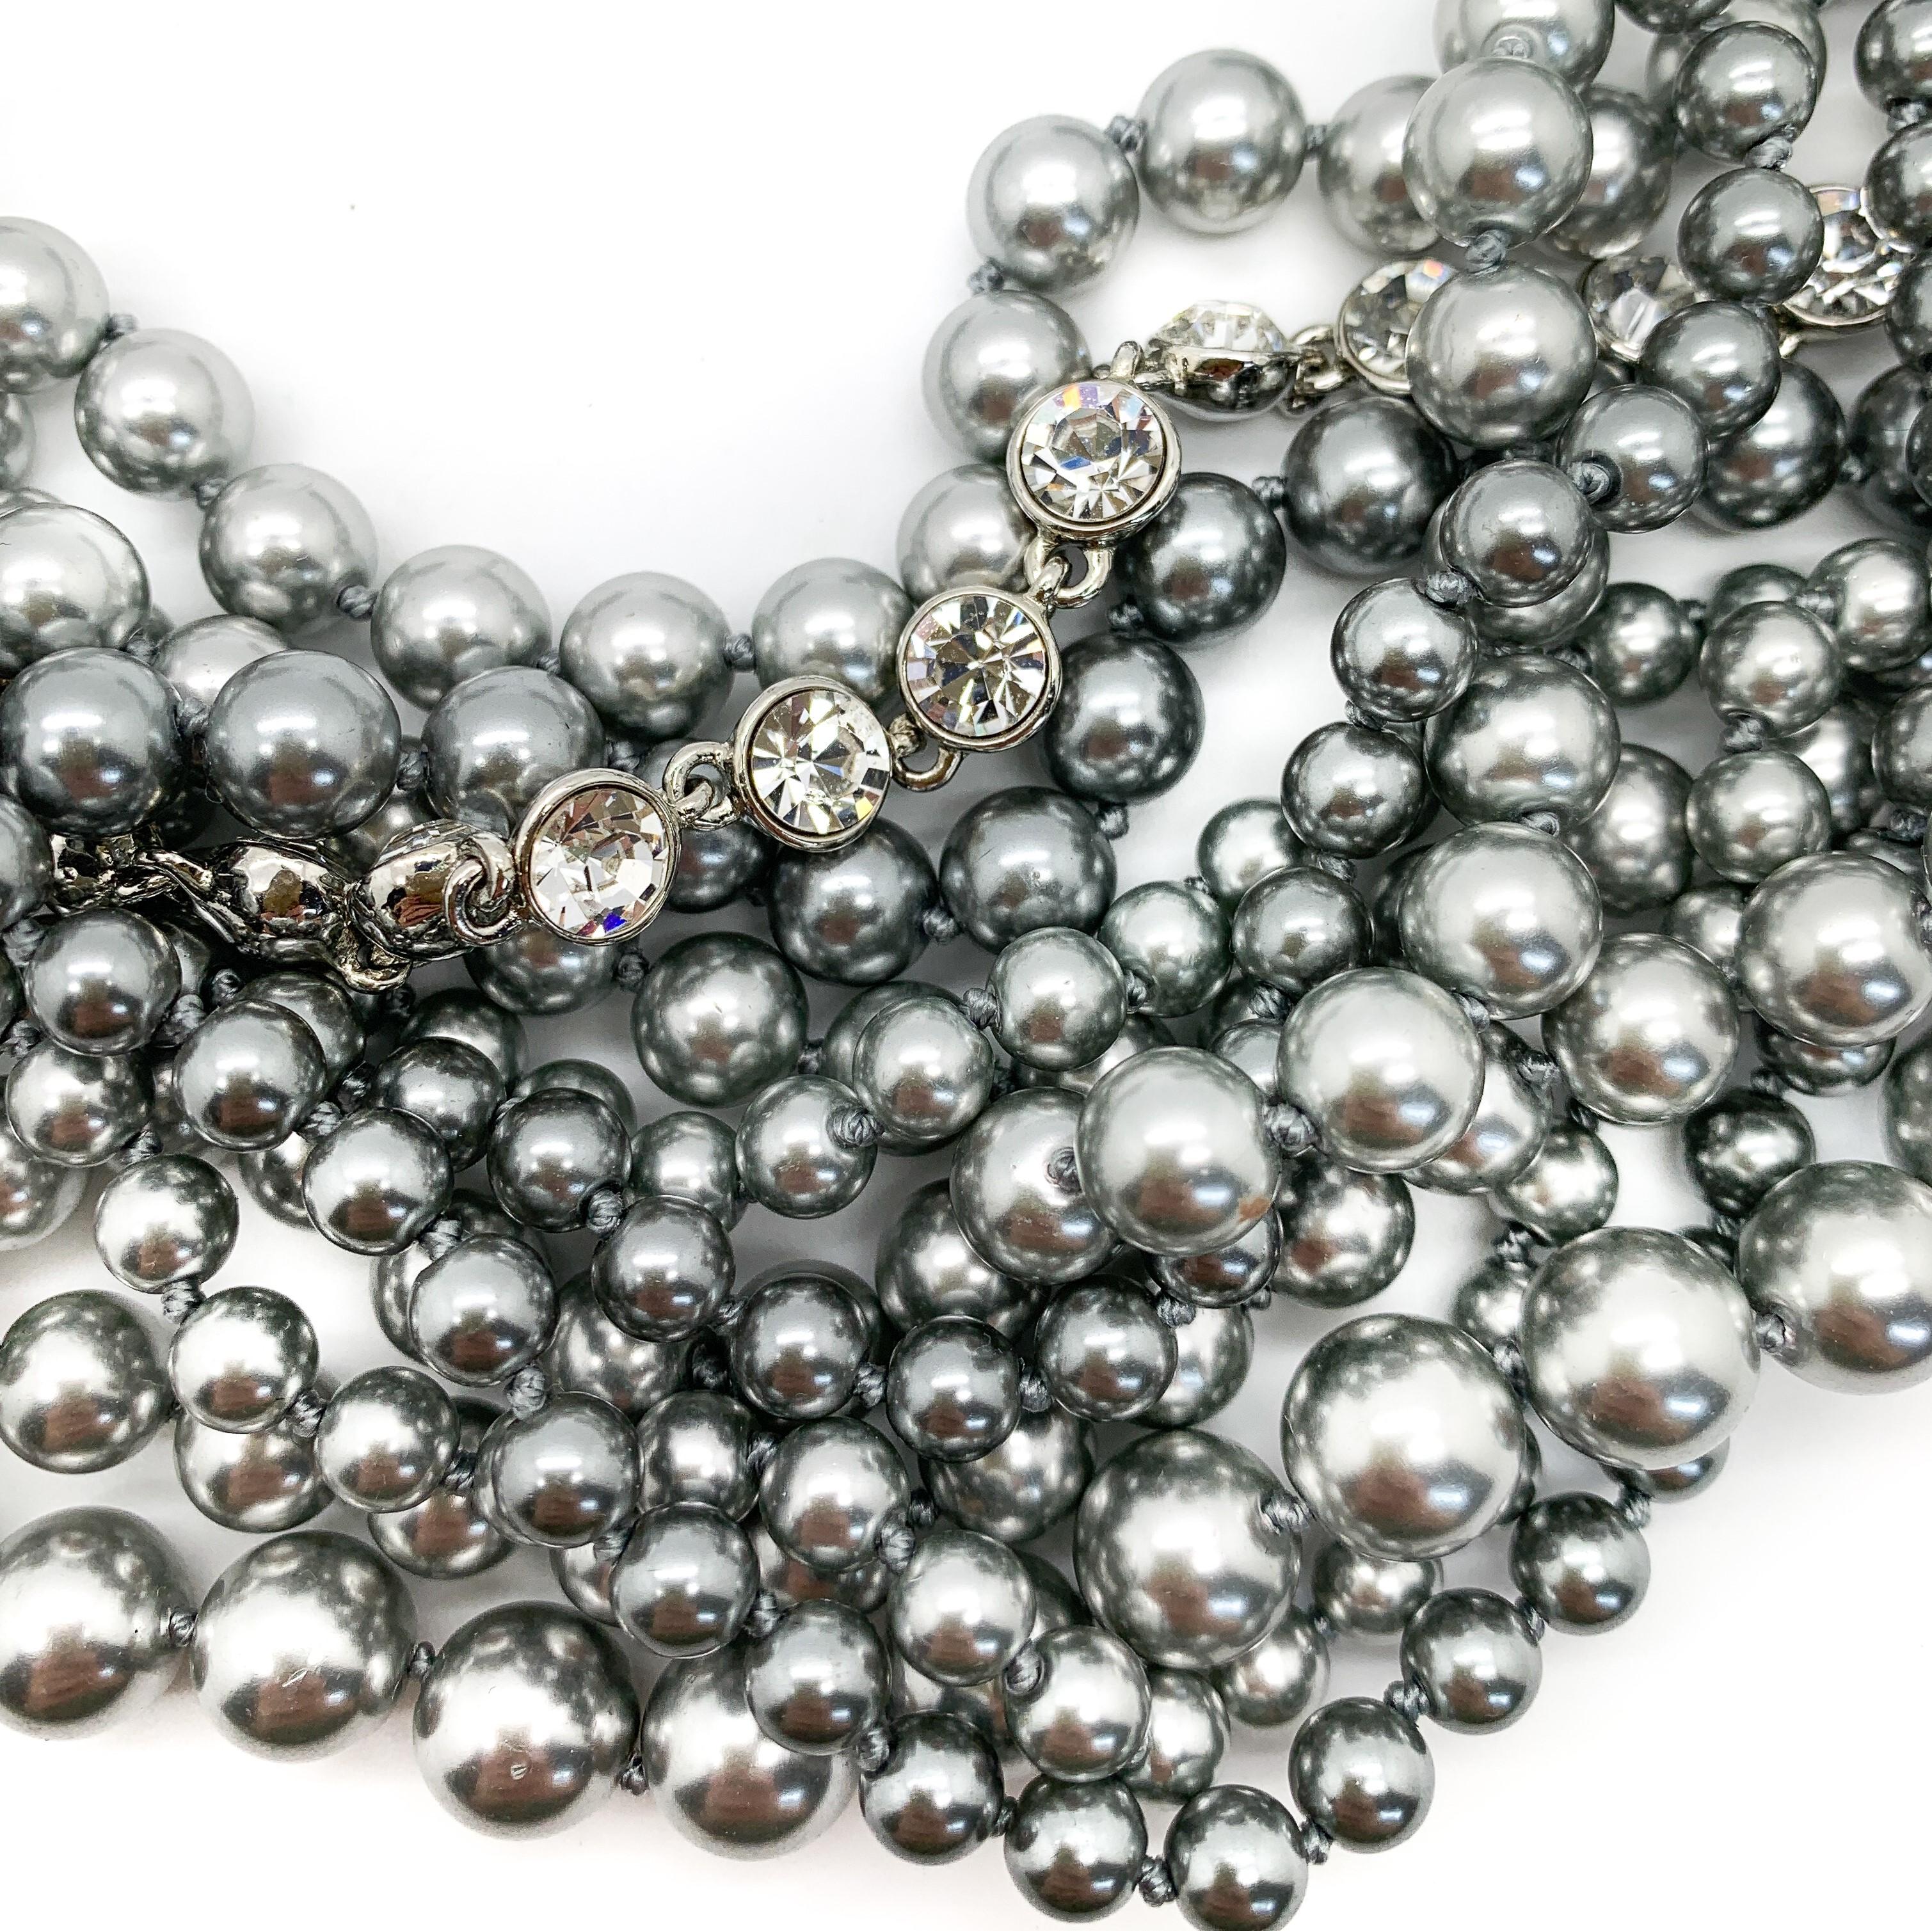 Nothing short of spectacular this Vintage Givenchy Torsade Necklace boasts rows and rows of tumbling grey and silver pearls interspersed with crystals. Adorn yourself with this beauty for the chicest of looks from the revered House of Givenchy.
One